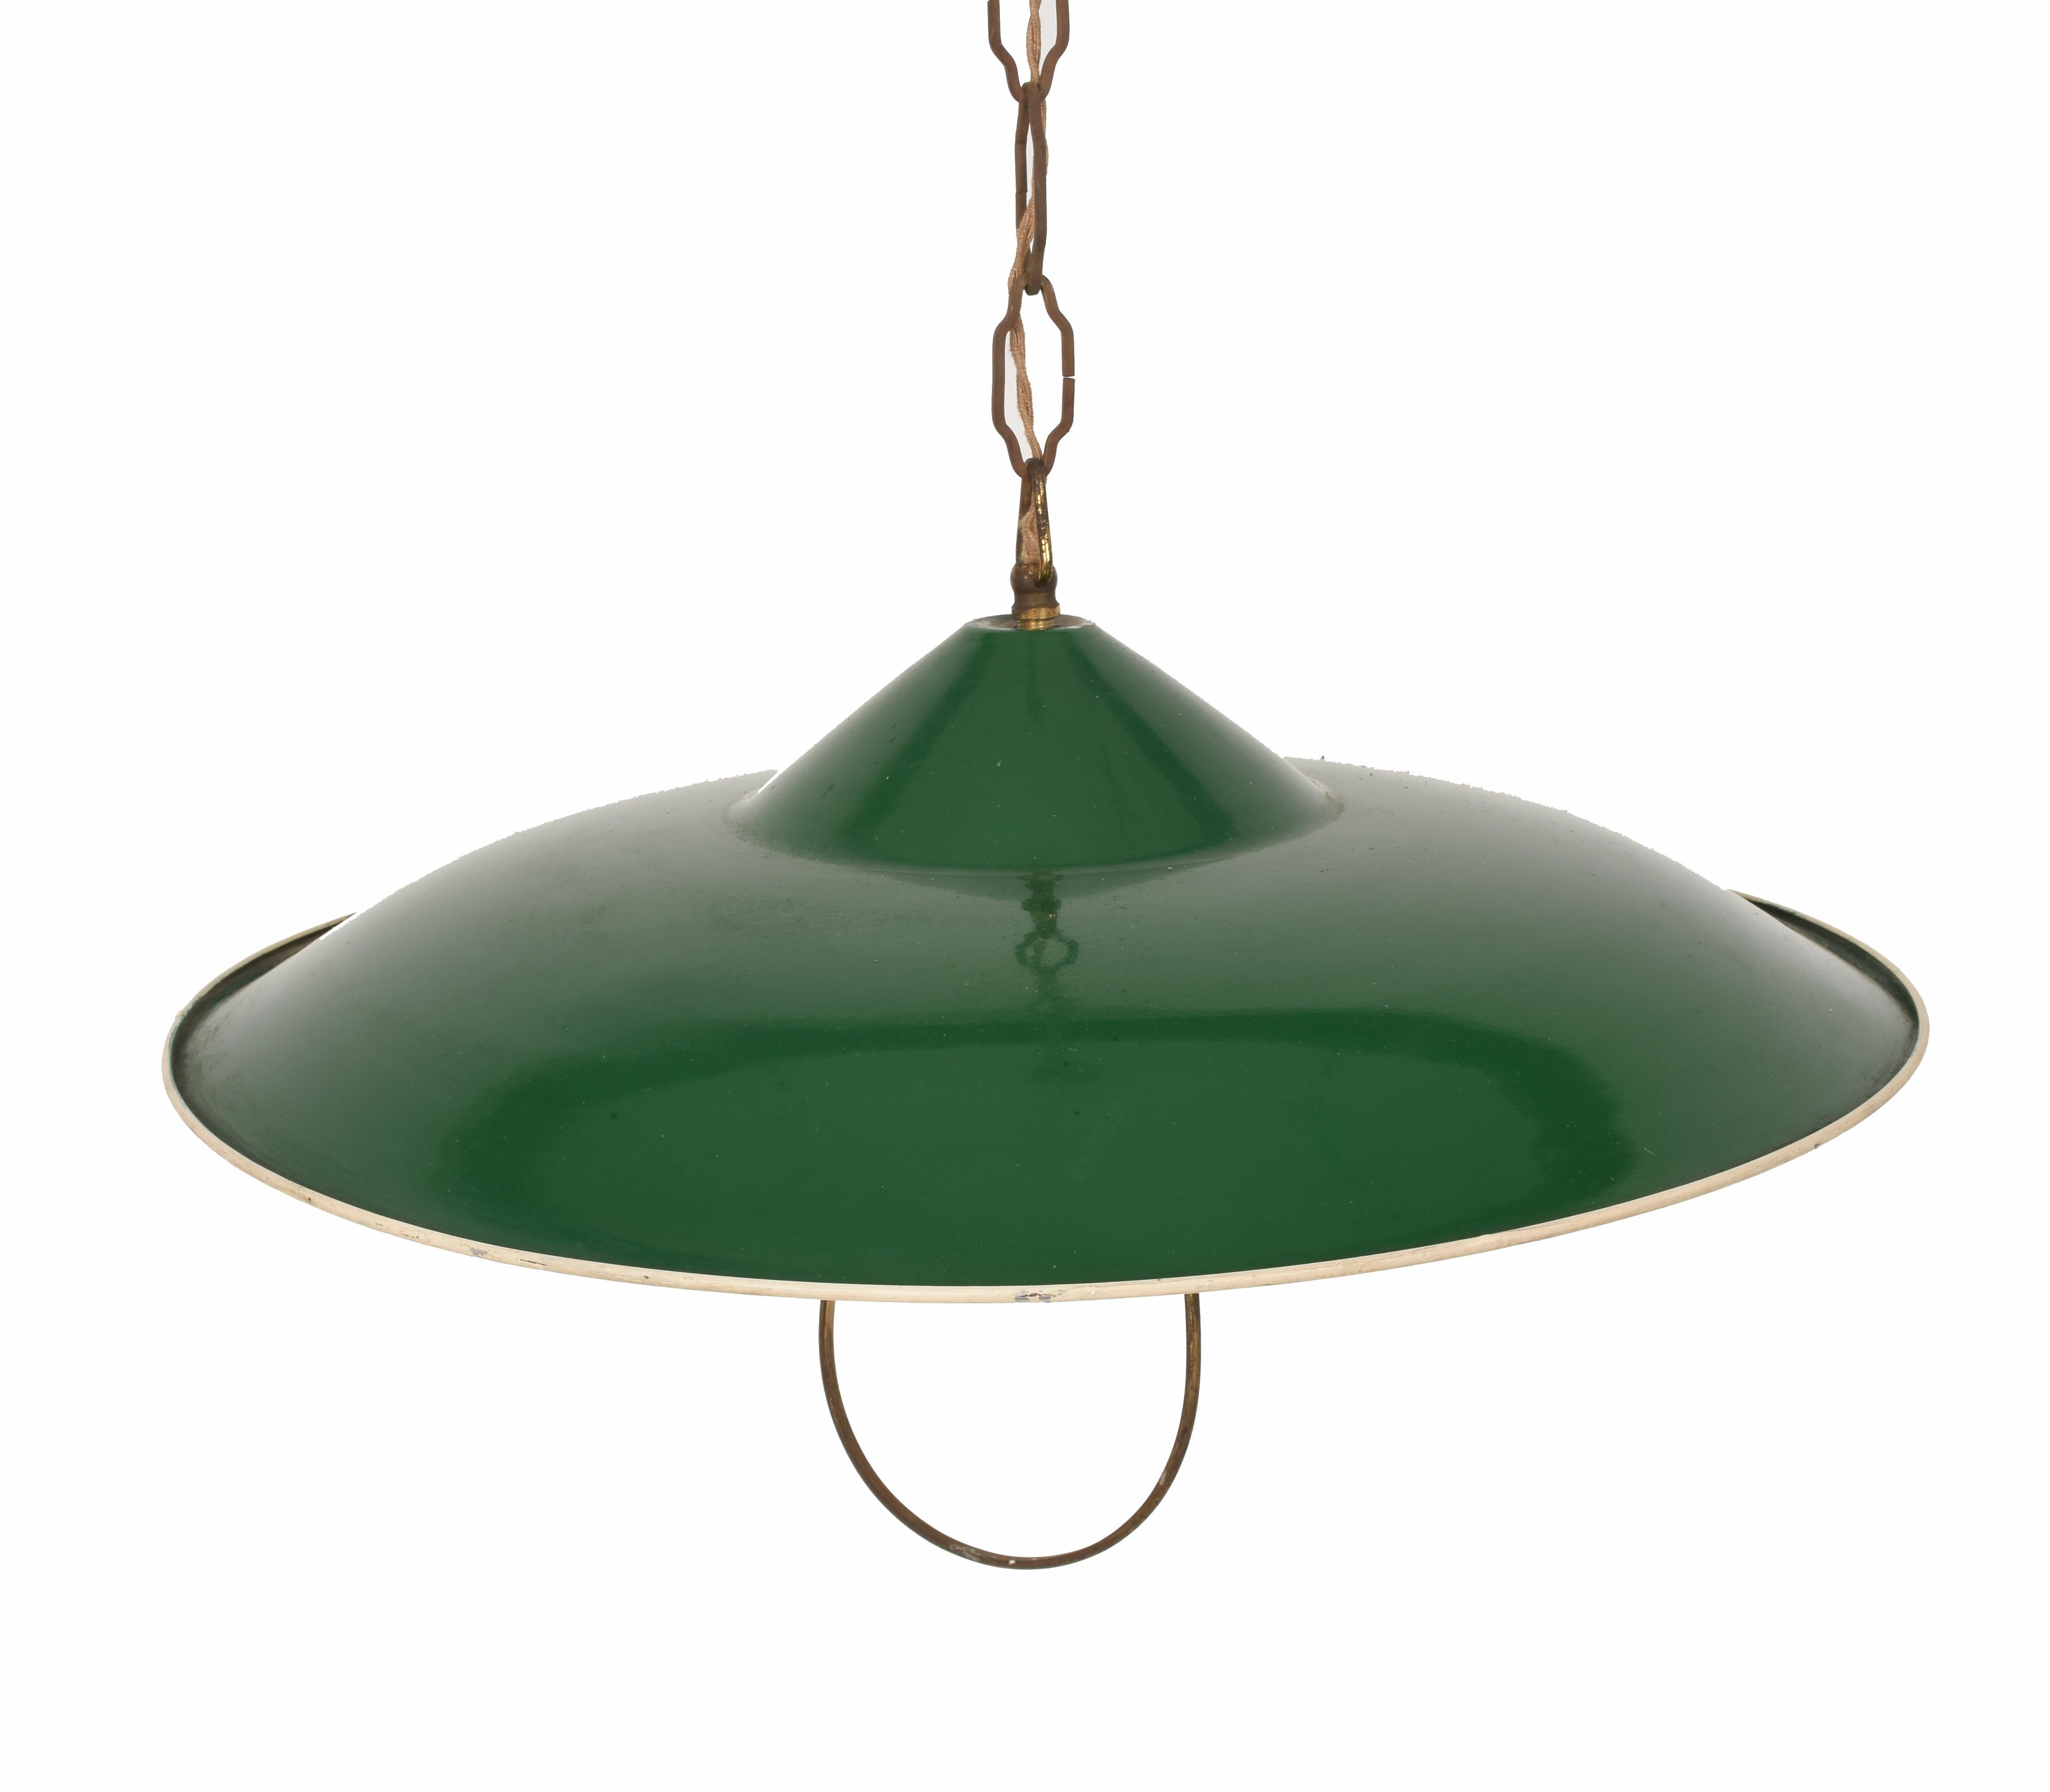 20th Century Chandelier in Green Glazed Metal Pendant Italy, Industrial Style of the 1950s For Sale